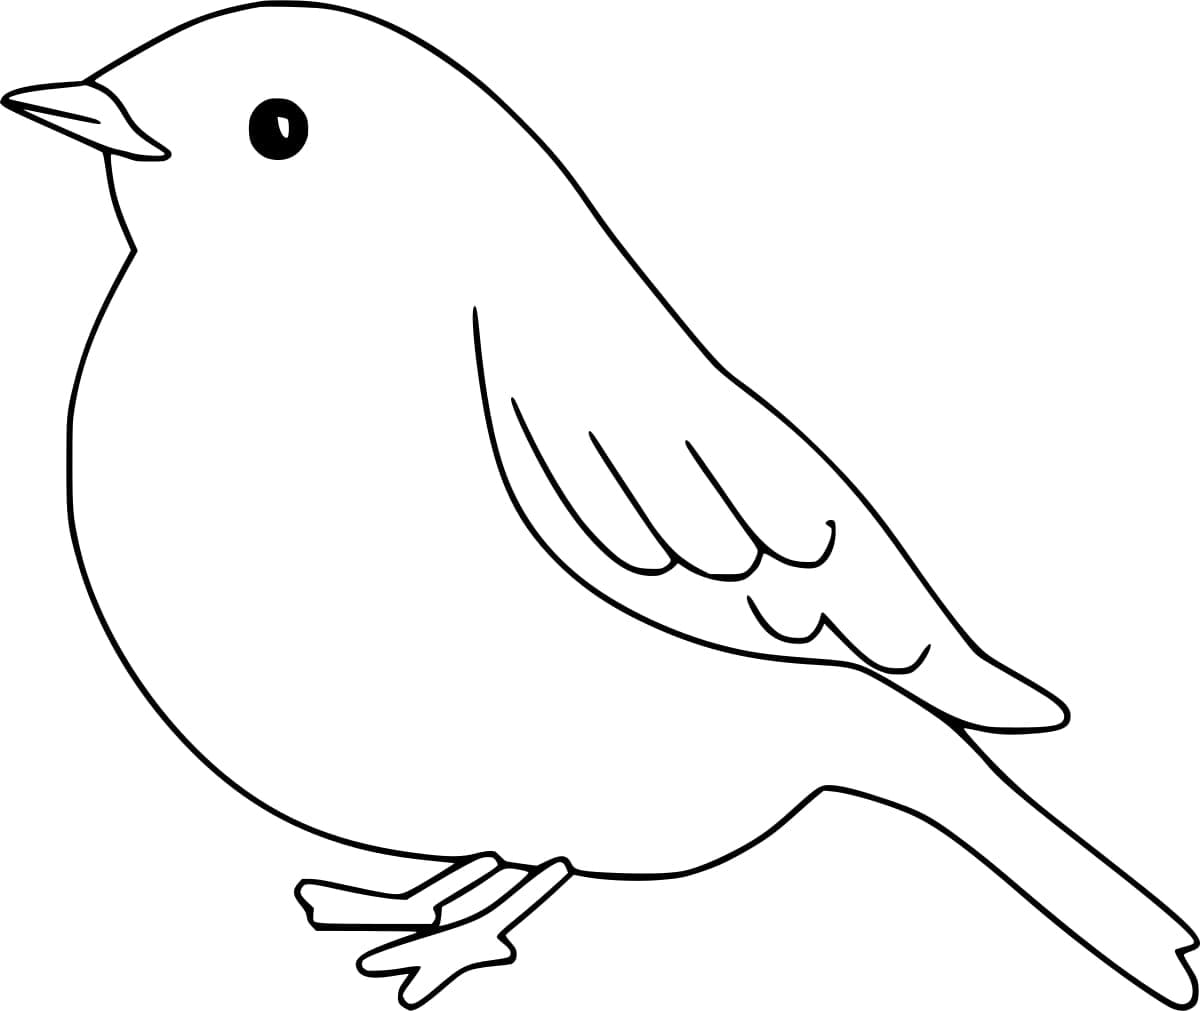 Adorable Robin Bird coloring page - Download, Print or Color Online for ...